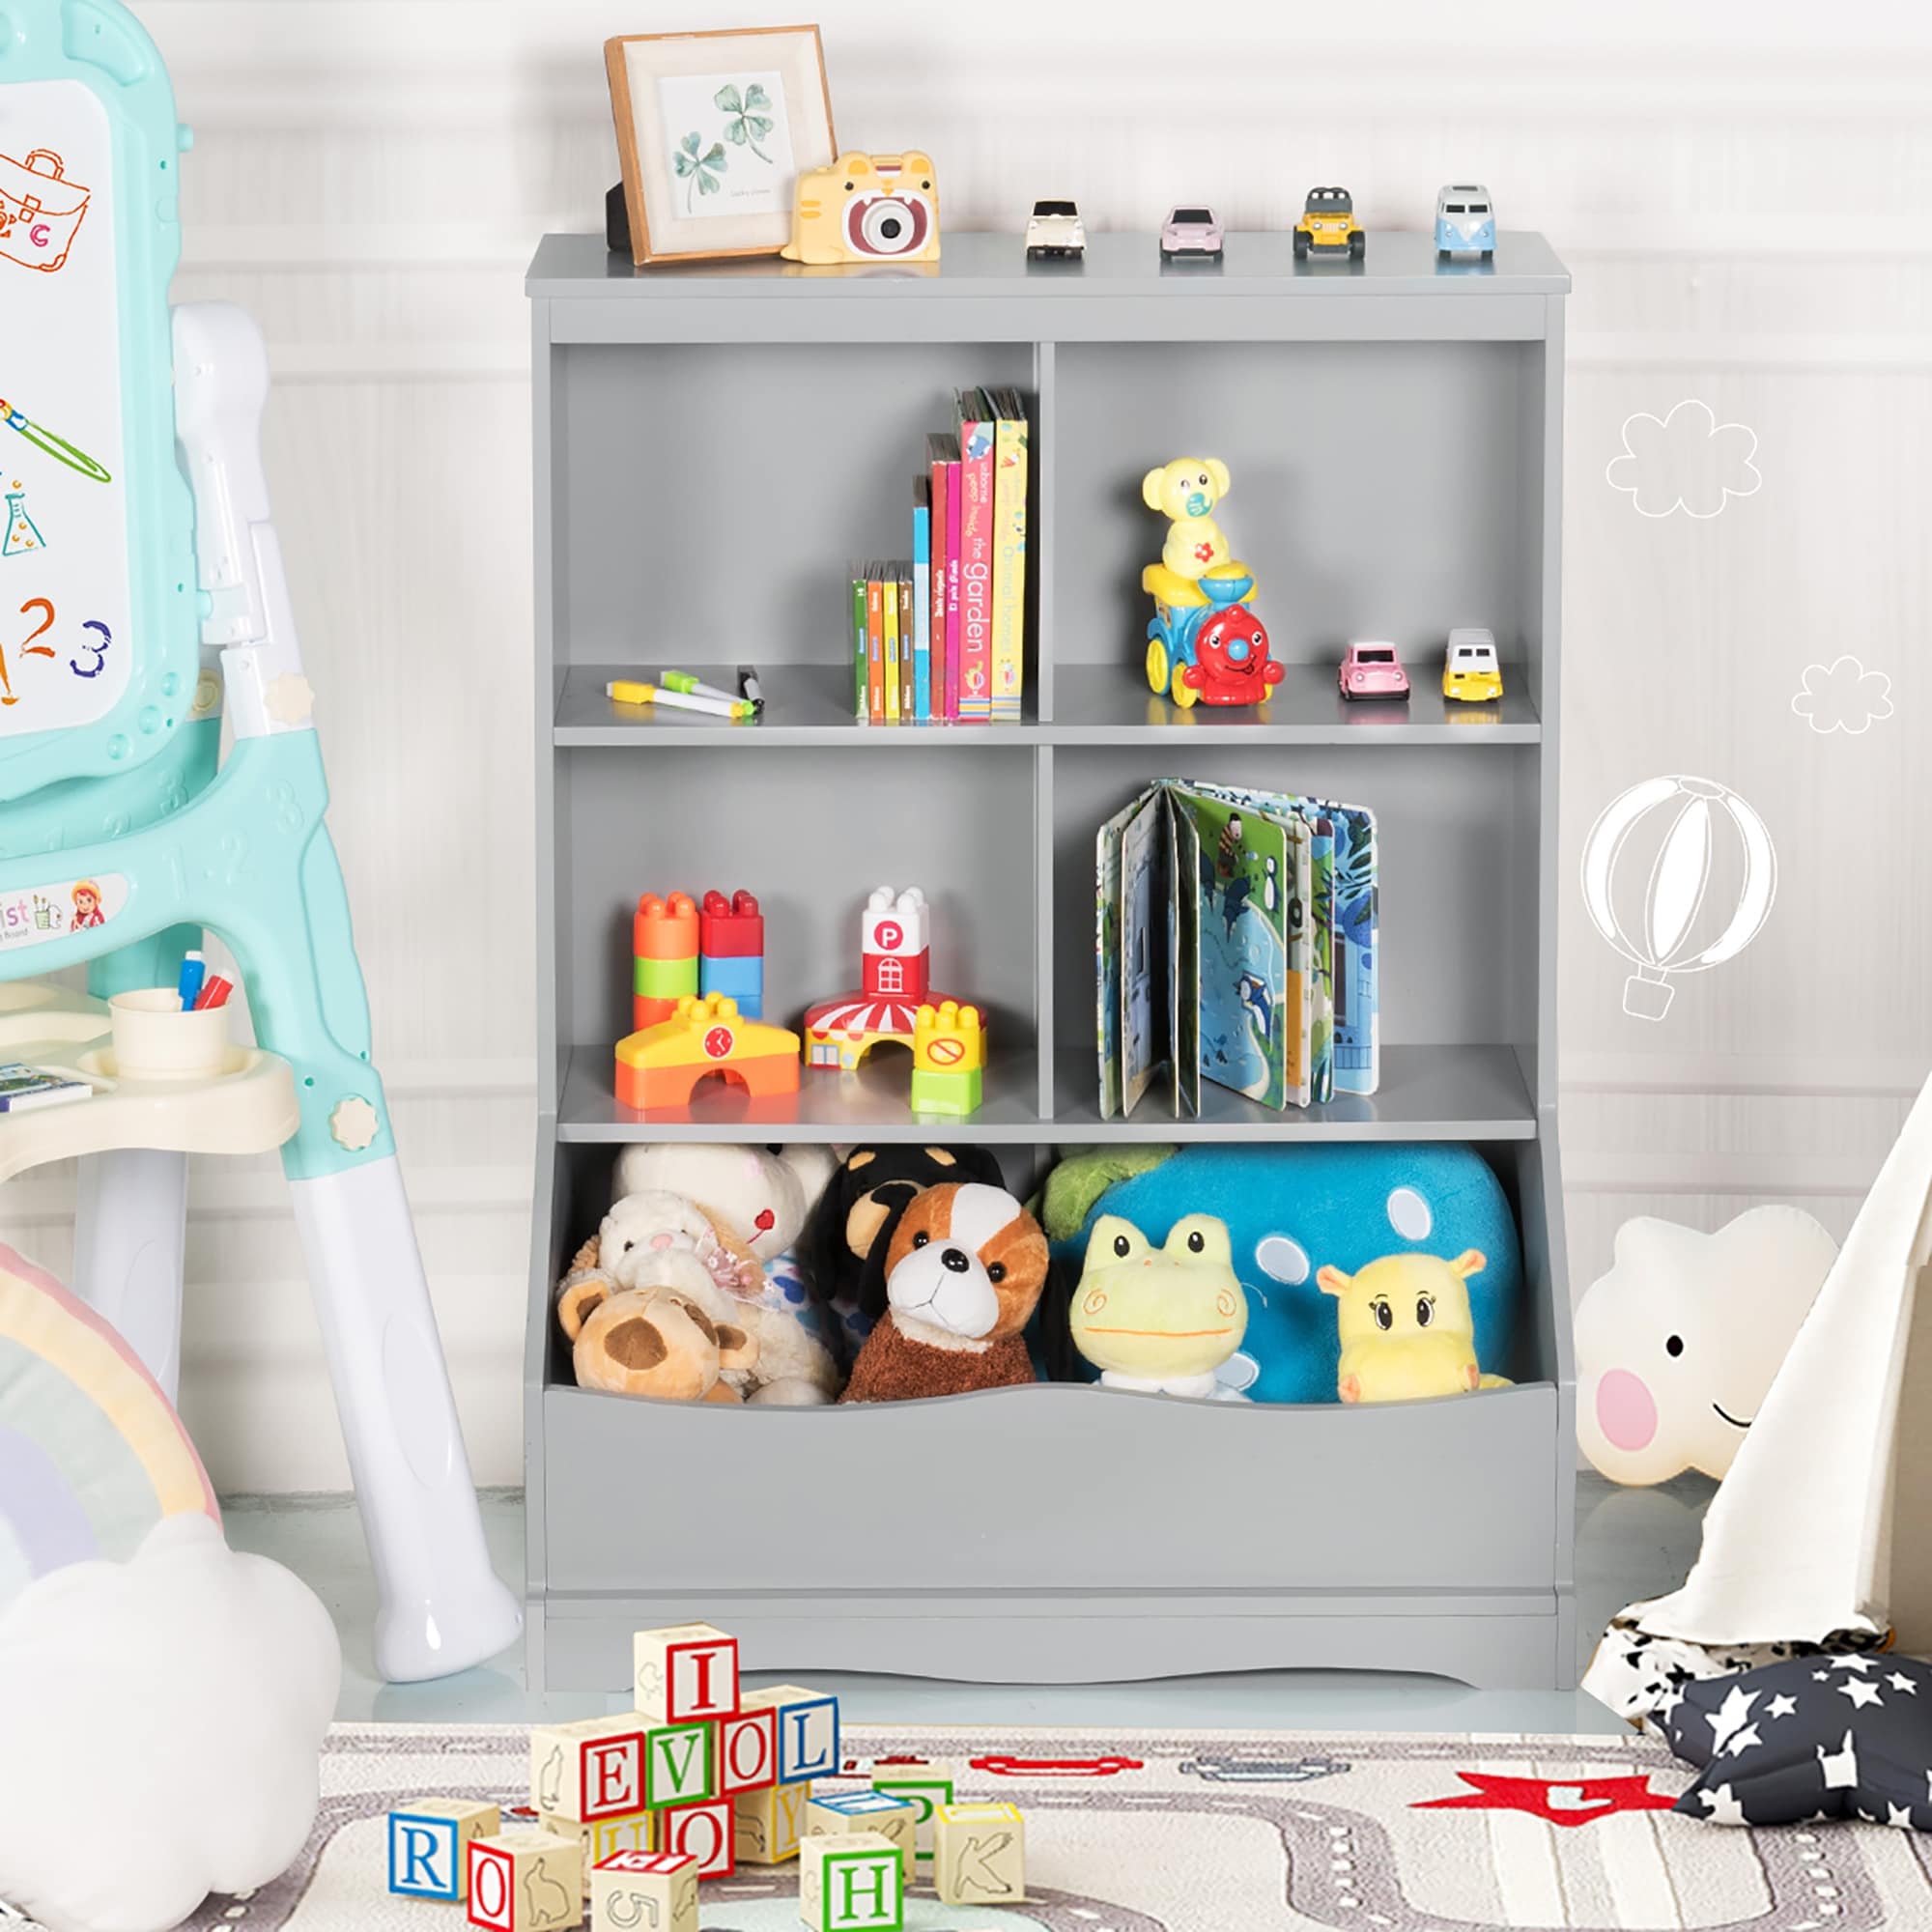 https://ak1.ostkcdn.com/images/products/is/images/direct/ebce99adffe33d2b54529140e0e8a6985ae4523f/3-Tiers-4-Cubies-Toy-Organizer-Wood-Storage-Cabinet-for-Kids.jpg